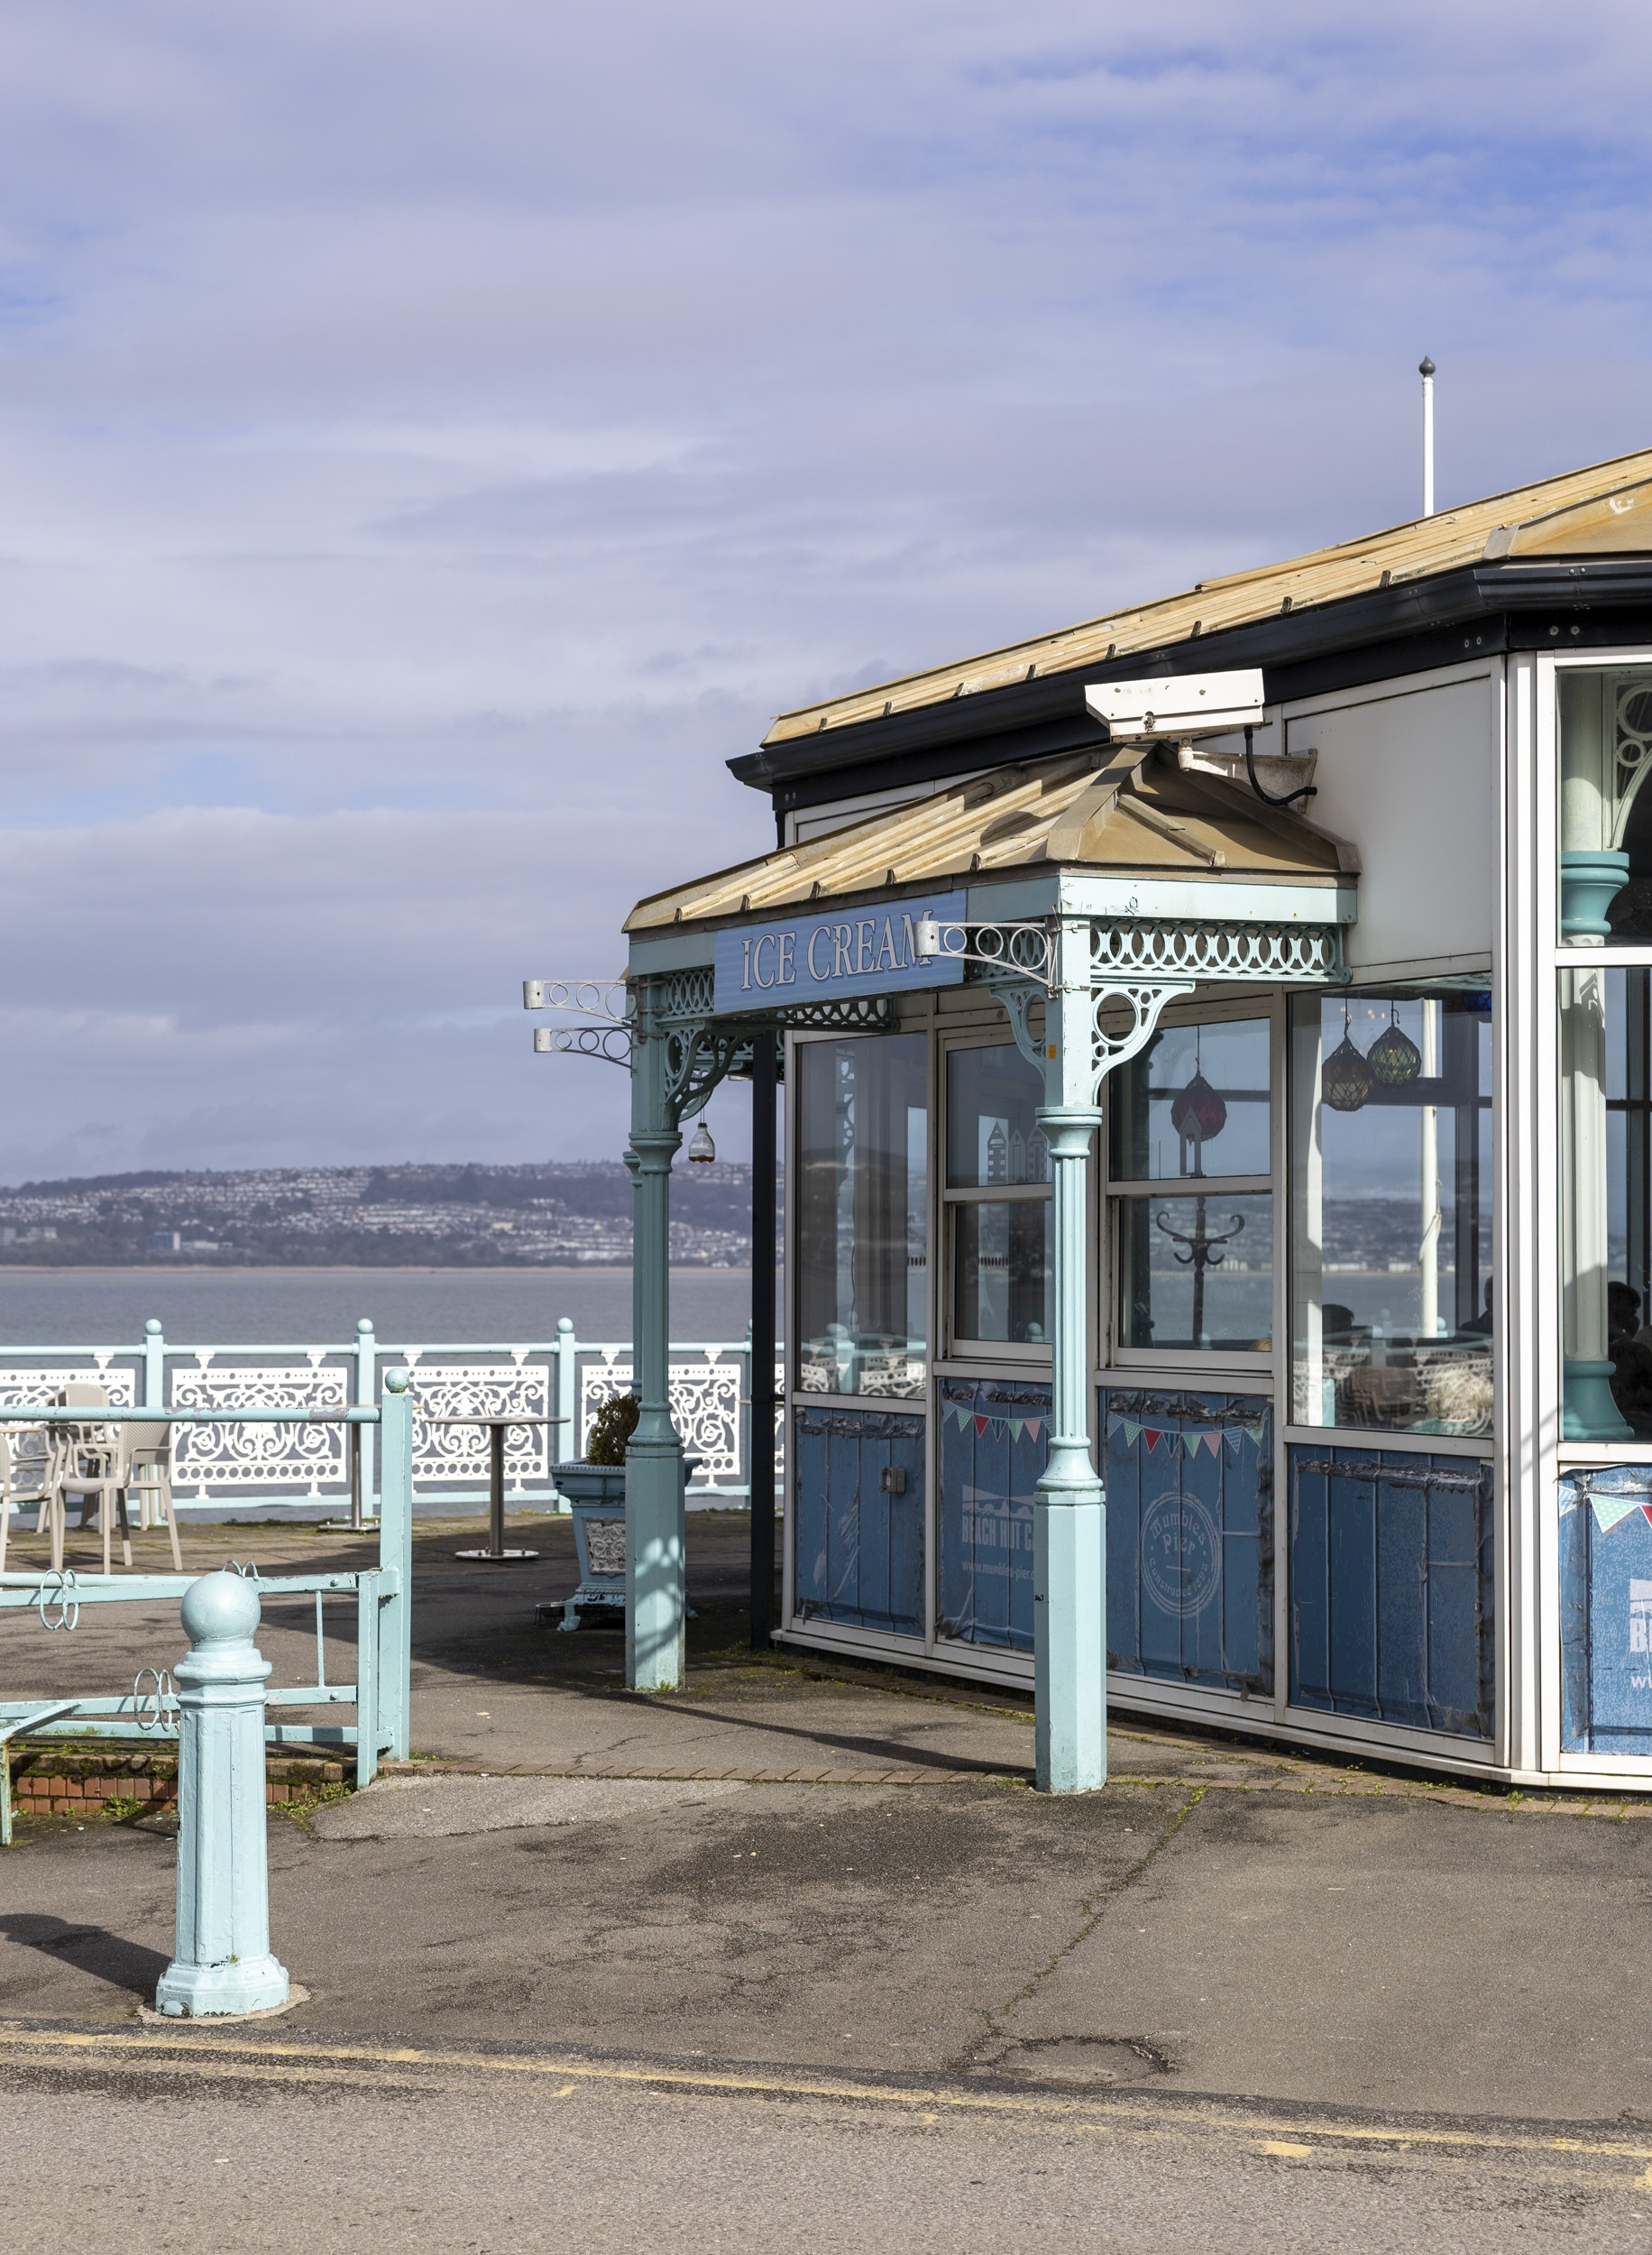 Canon EOS R8 sample image of a seaside pier in bright weather